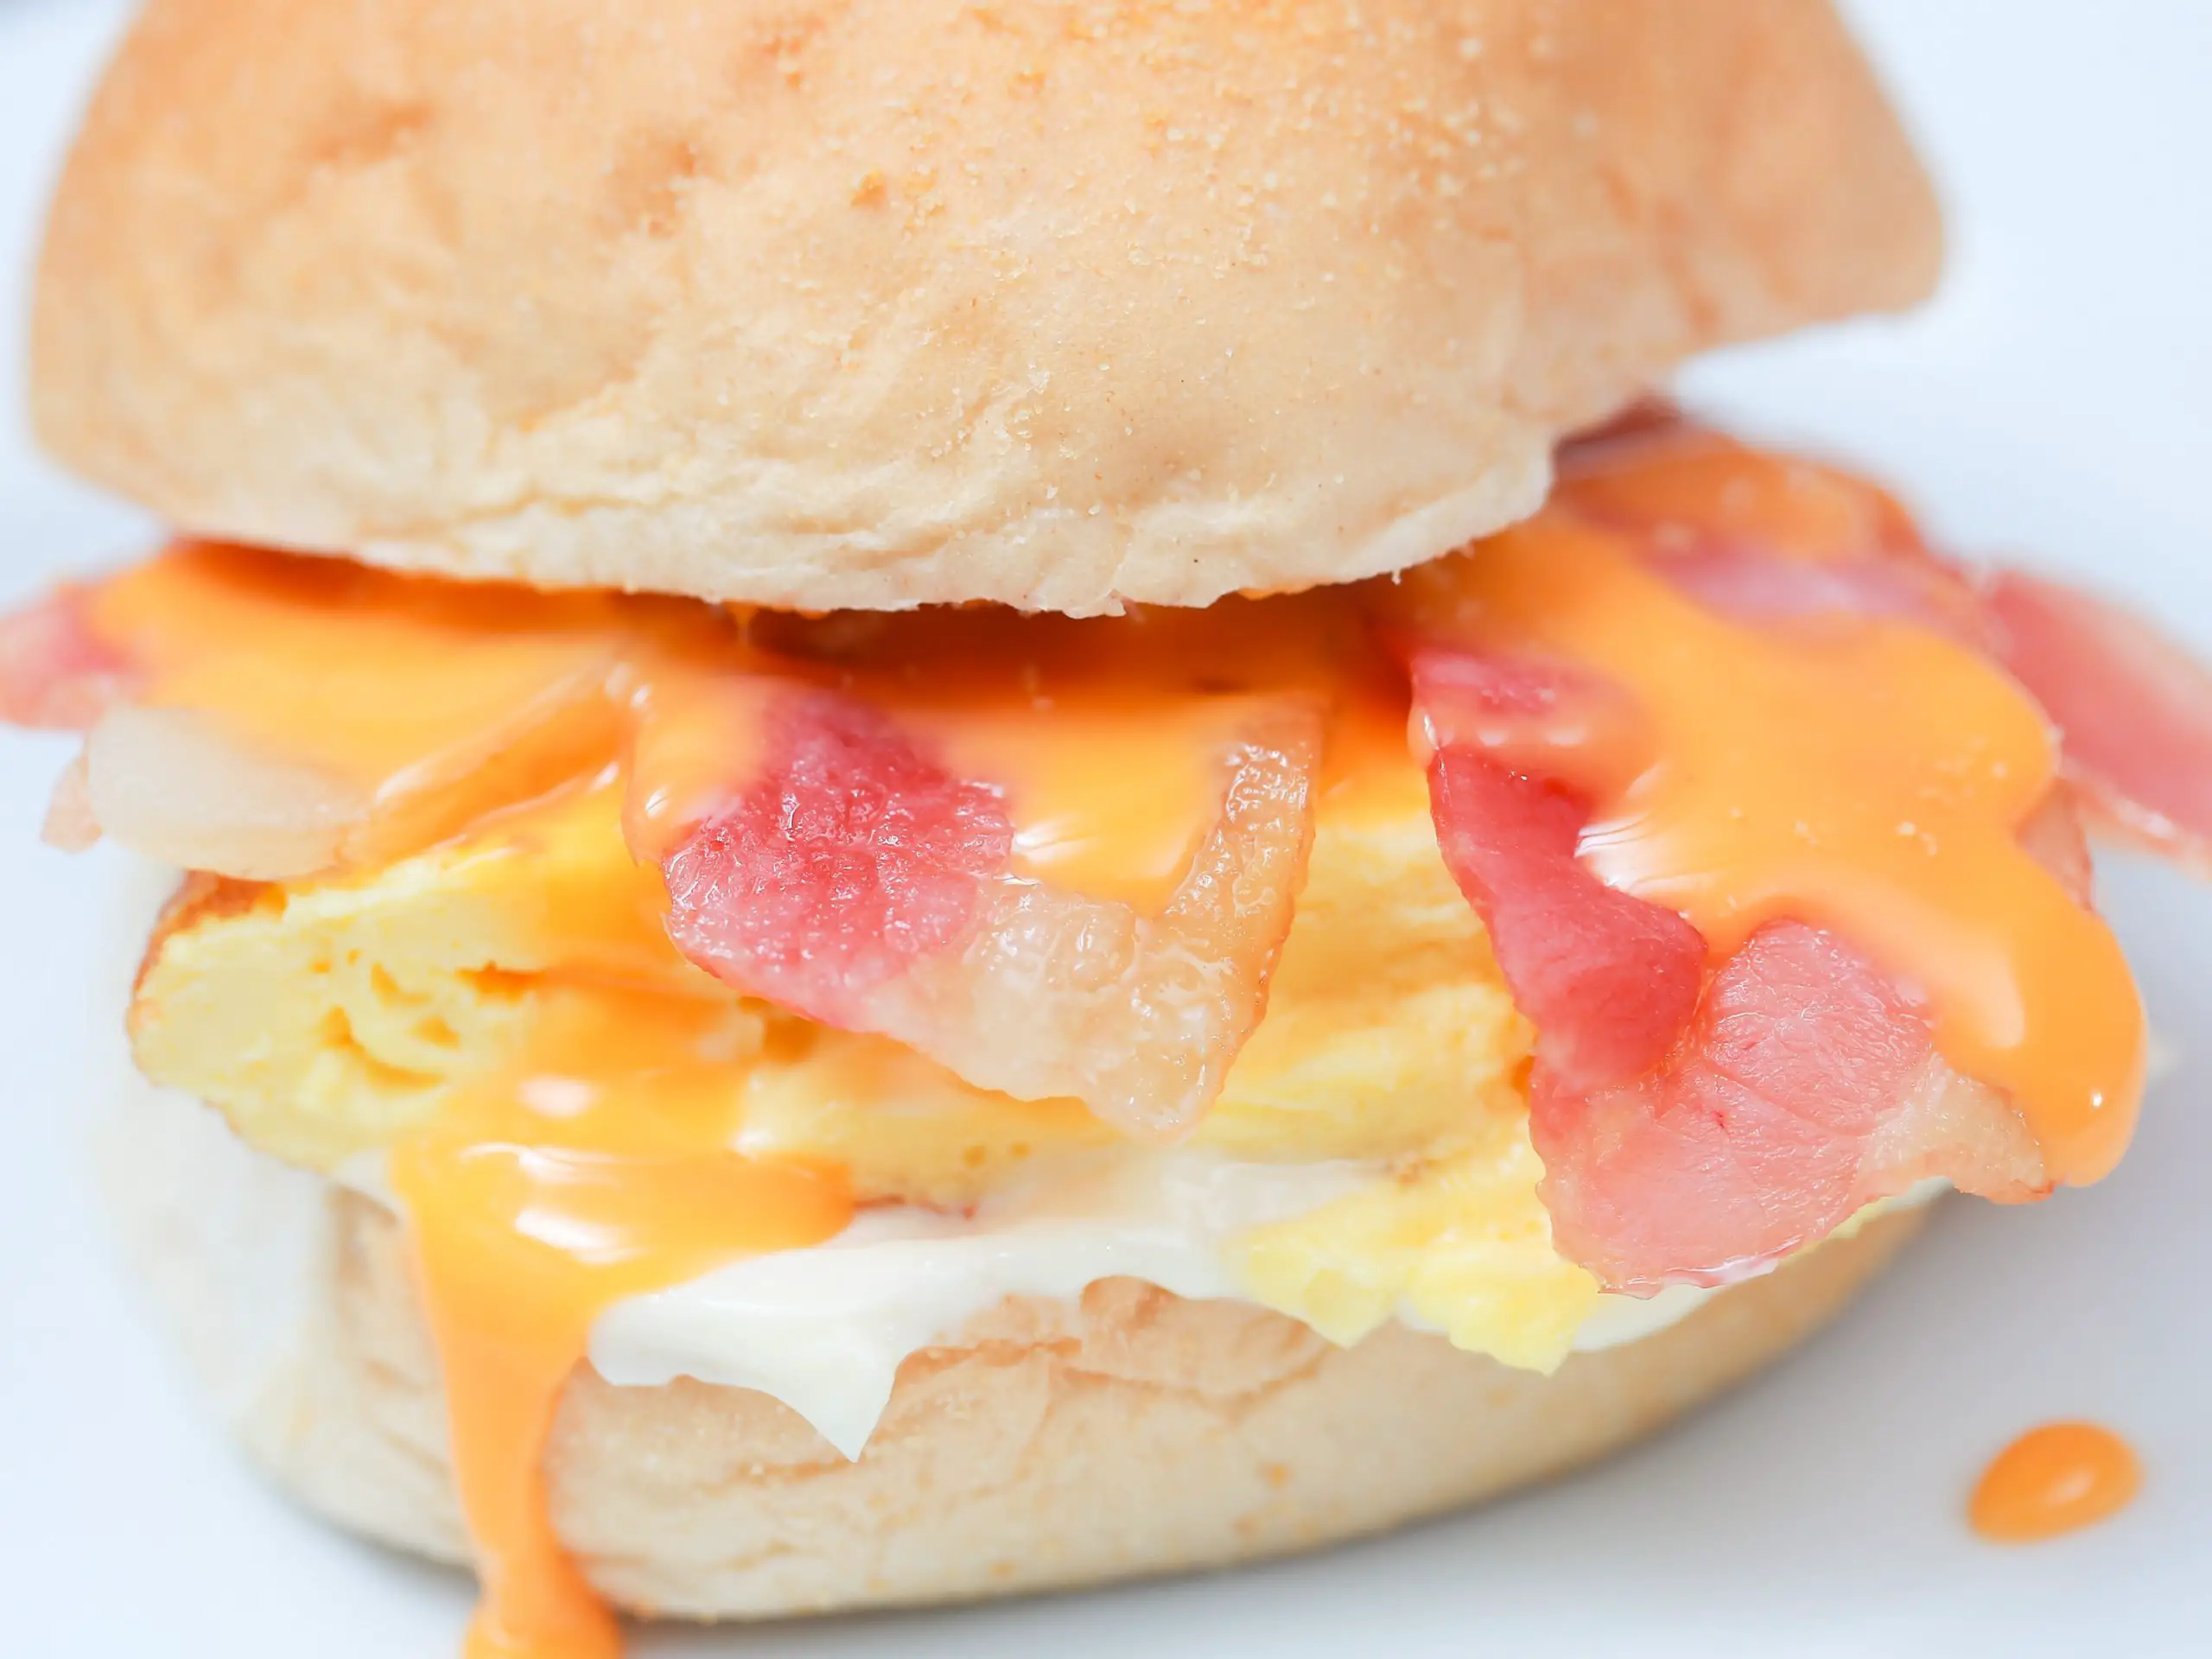 How to Make an Egg and Cheese Sandwich: 4 Steps (with Pictures)